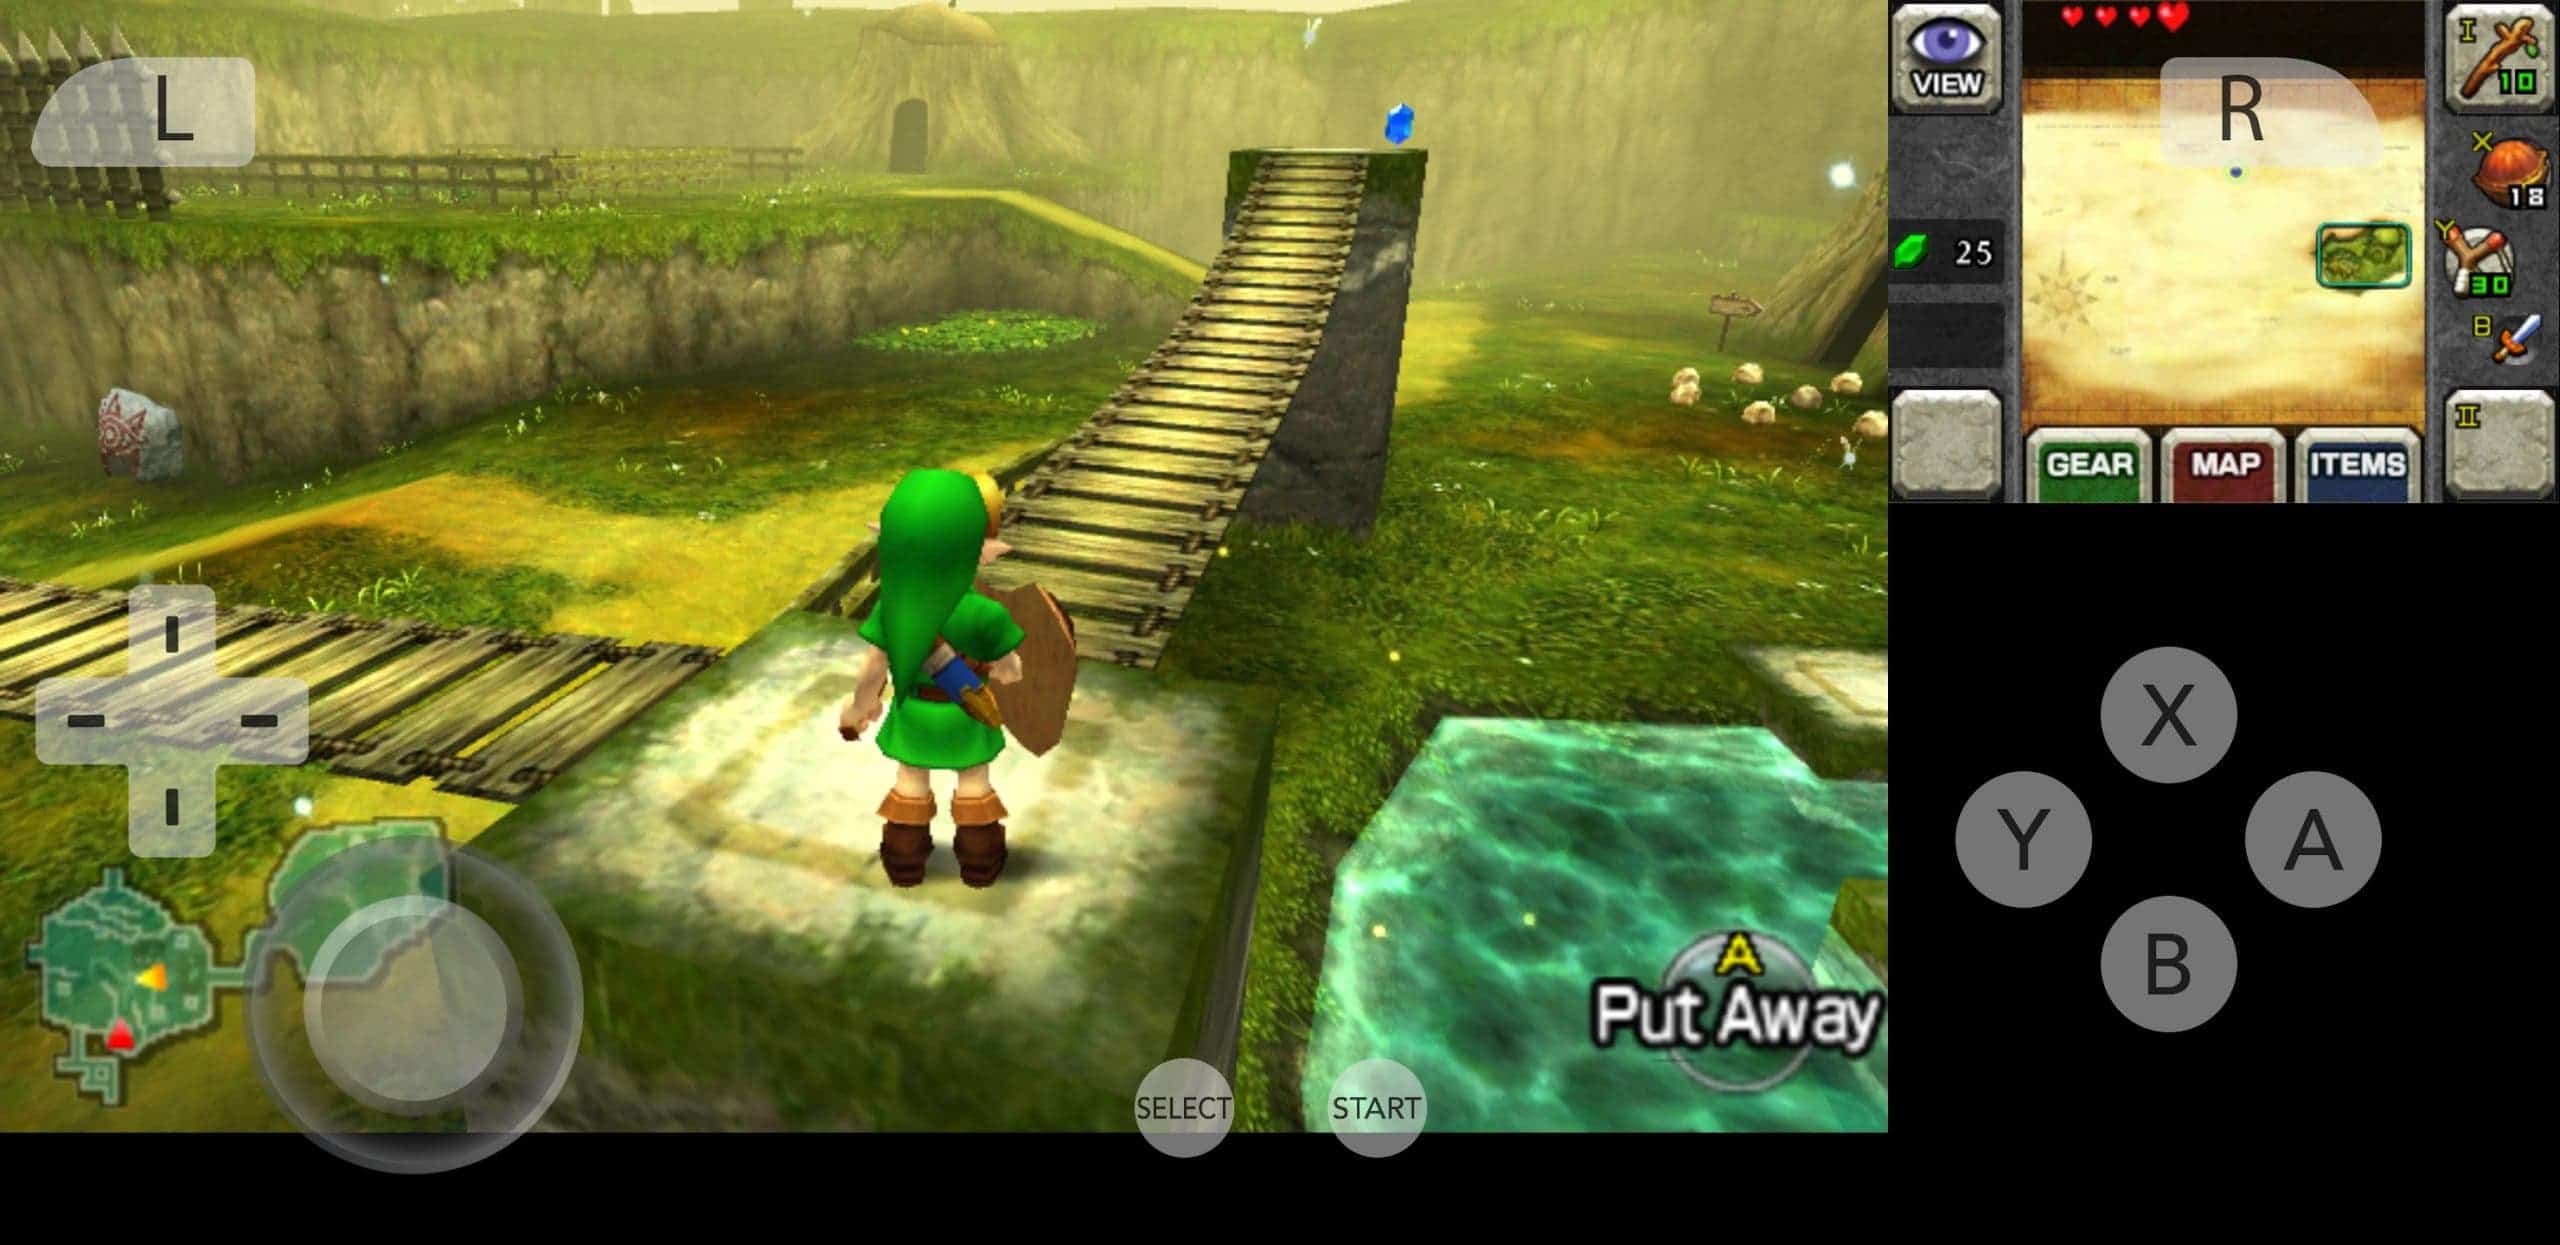 Citra Nintendo 3DS emulator lands officially in Play Store